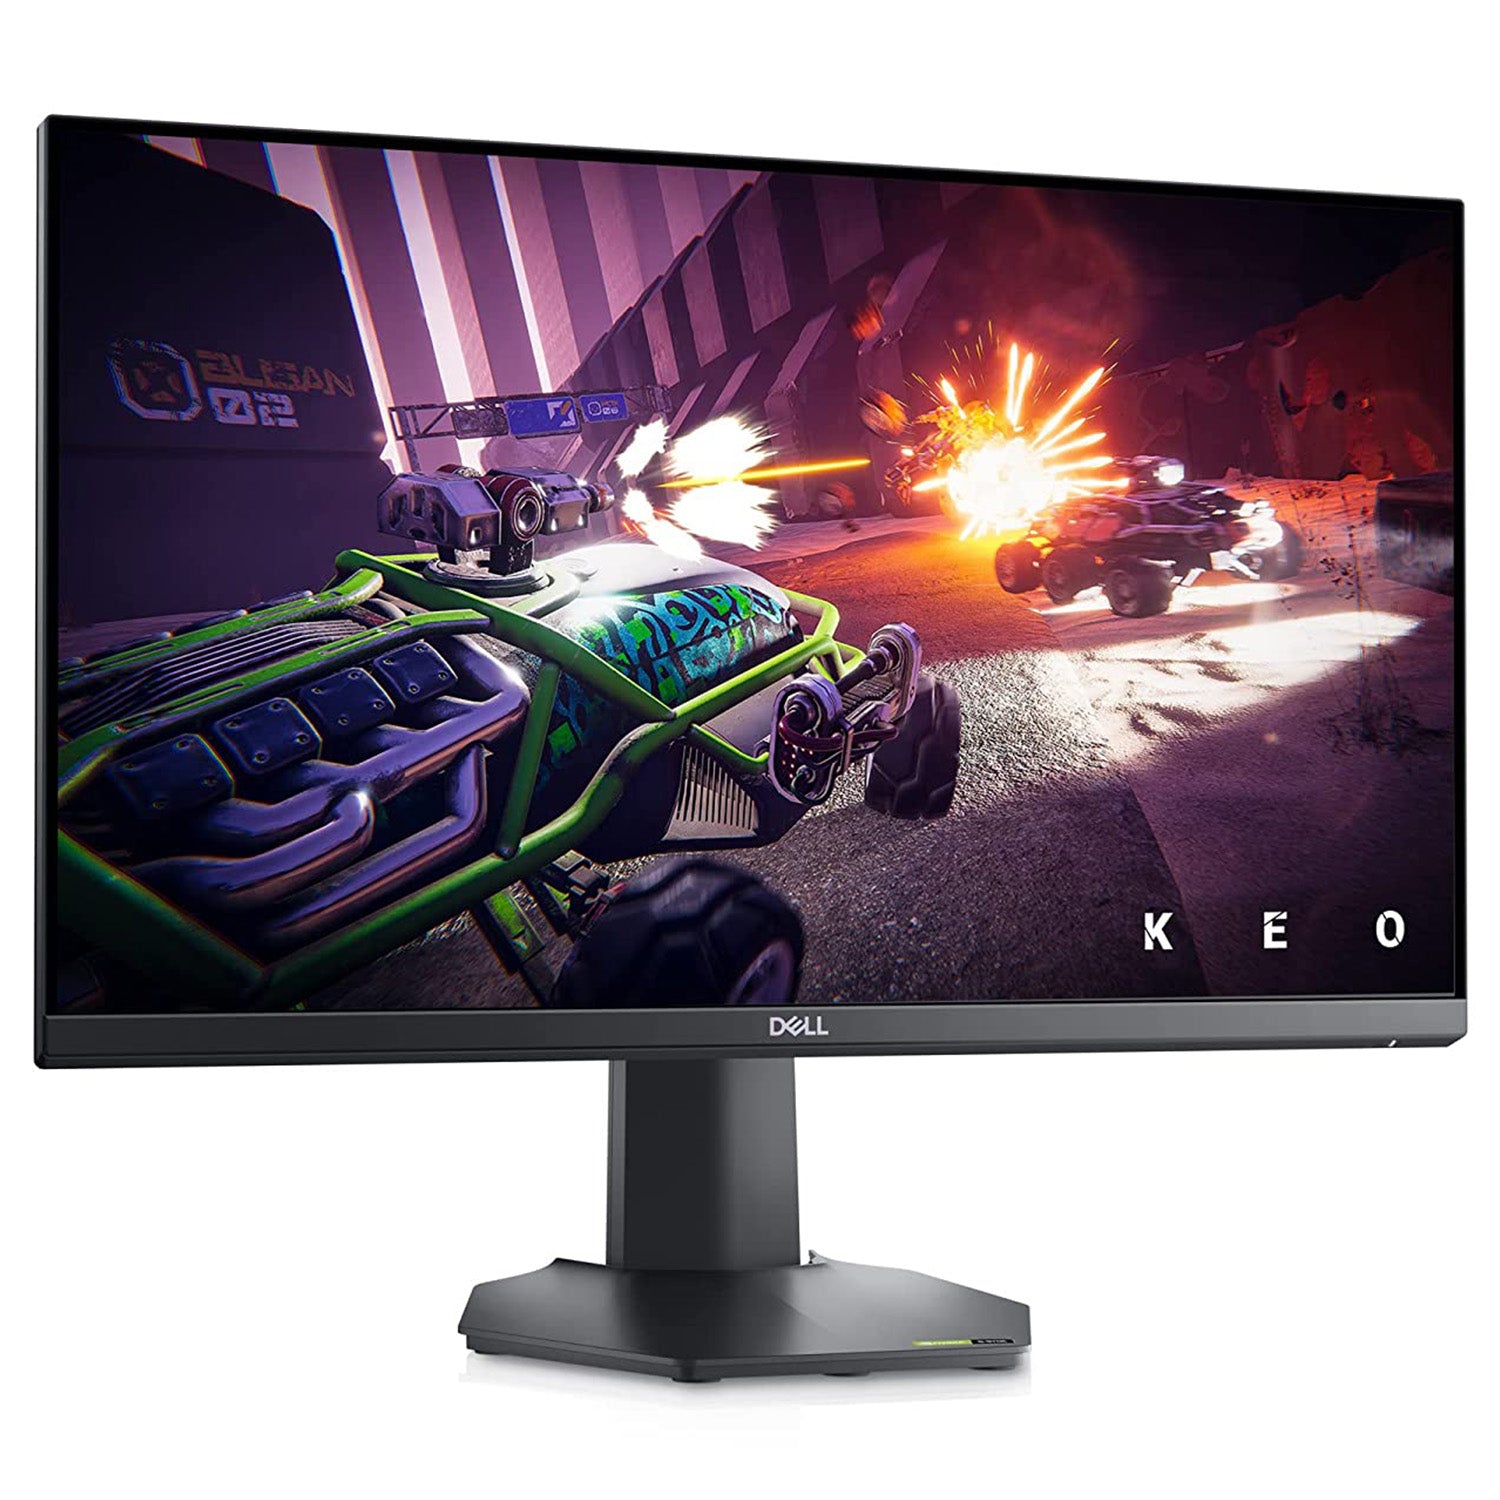 Dell 24" Inch Gaming Monitor -Full HD (1080p) at 165 Hz -1ms Response Time, IPS, AMD FreeSync Technology, 99% sRGB Color Gamut, NVIDIA G-Sync Compatible, HDMI, DisplayPort, Black- G2422HS